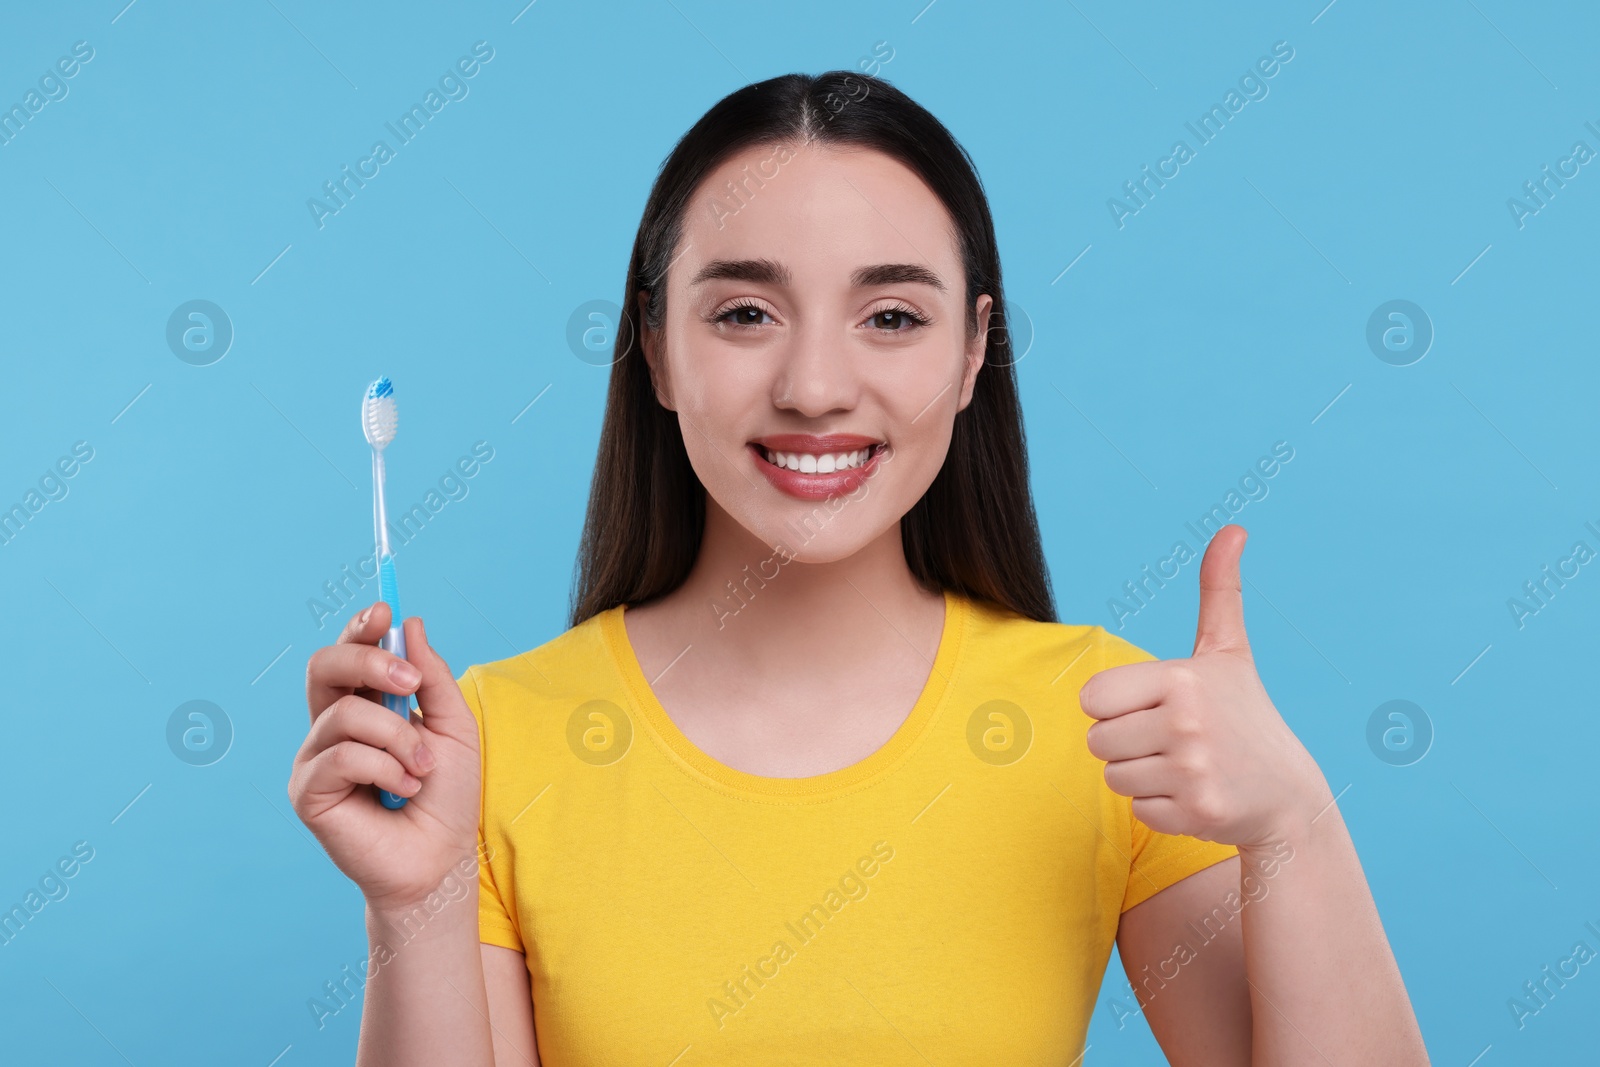 Photo of Happy young woman holding plastic toothbrush and showing thumb up on light blue background